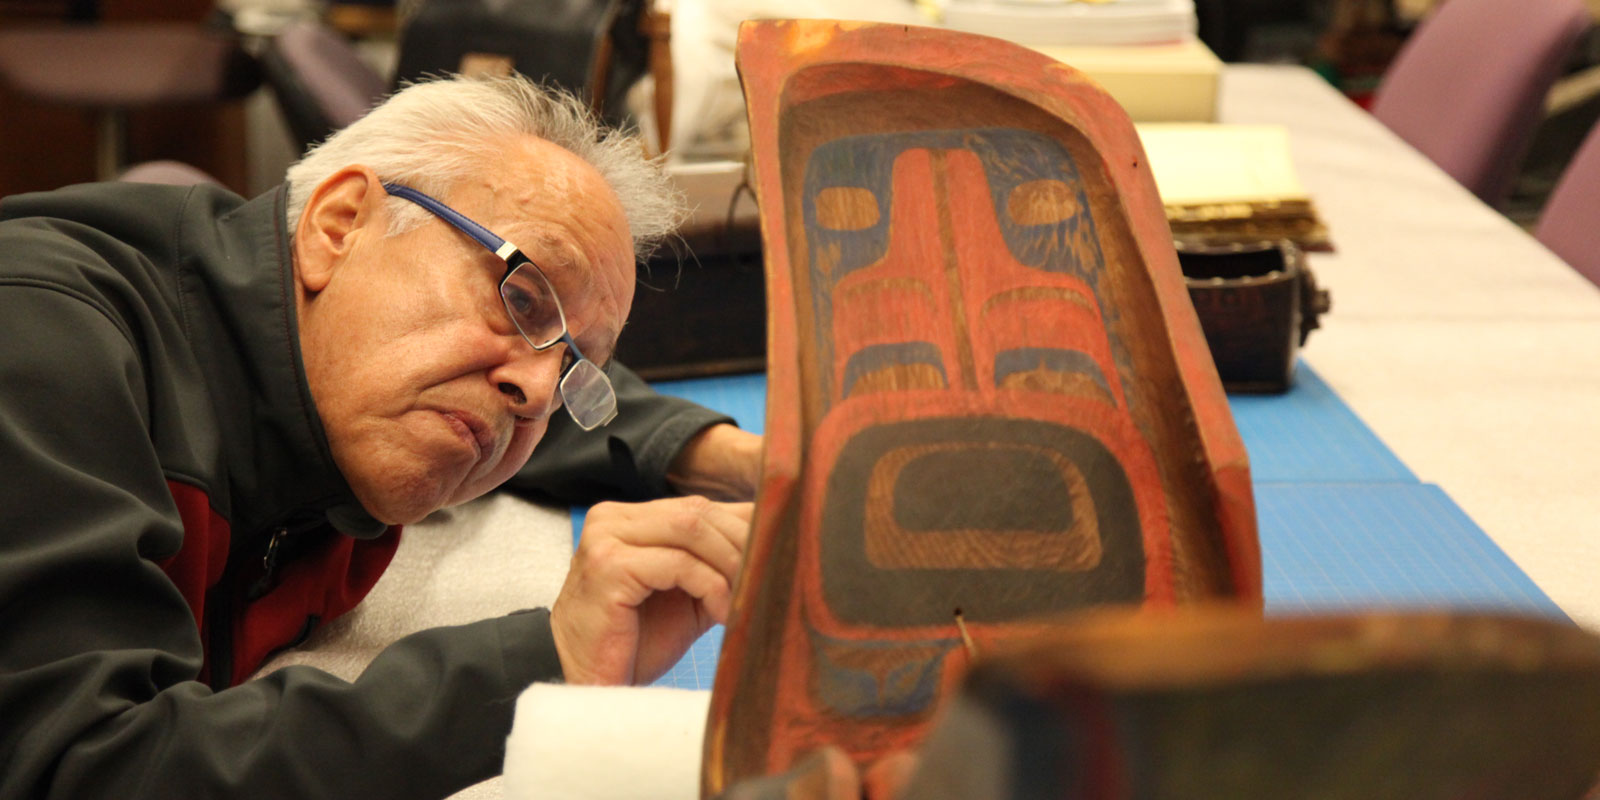 A man carefully examines the mask that likely inspired the Seahawks mask